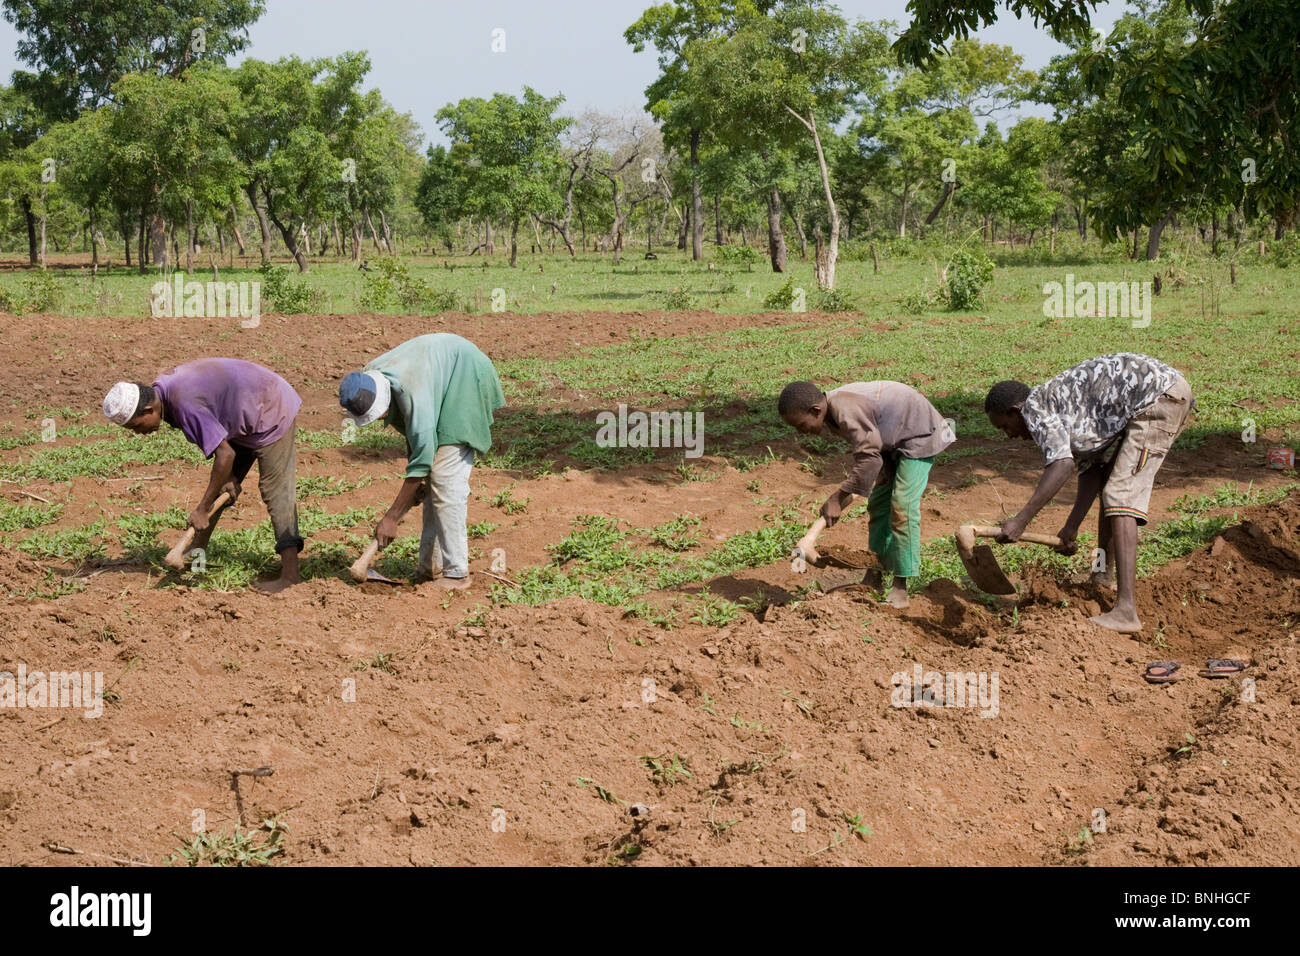 Young men from a Fulani family in a village in Ghana. They are hoeing the ground in preparation for the sowing of a maize crop. Stock Photo